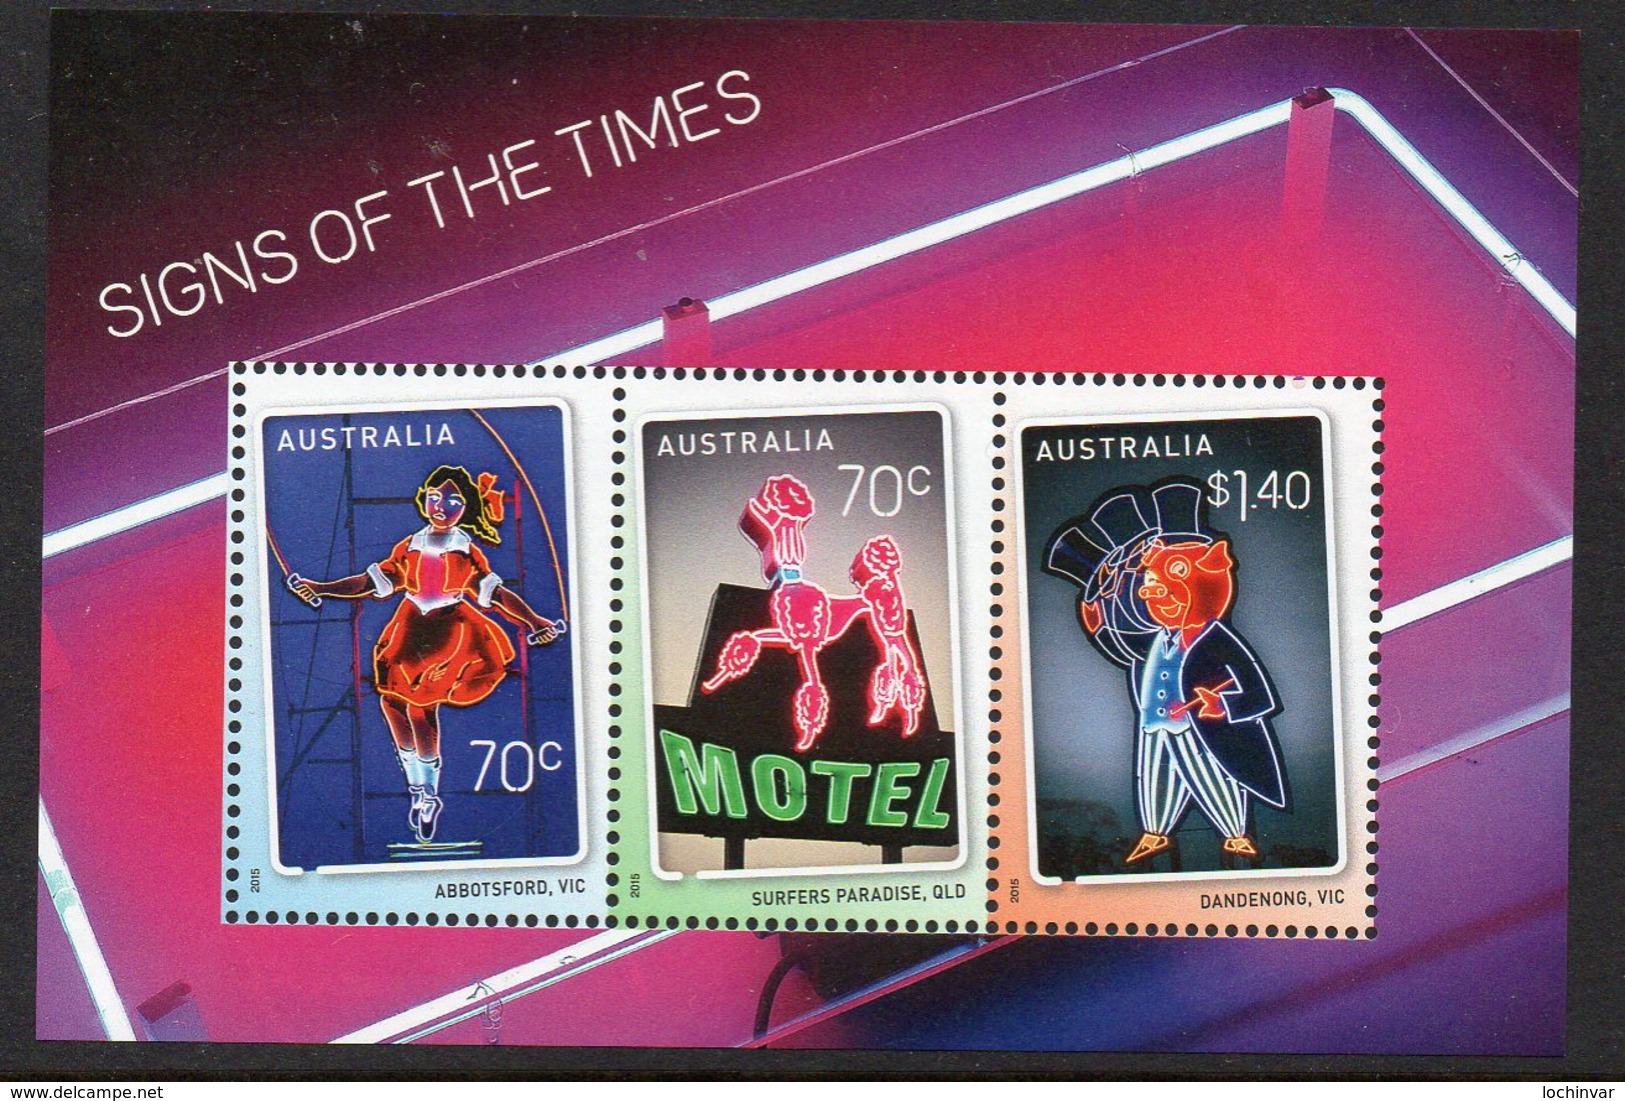 AUSTRALIA, 2015 SIGNS OF THE TIMES MINISHEET MNH - Mint Stamps